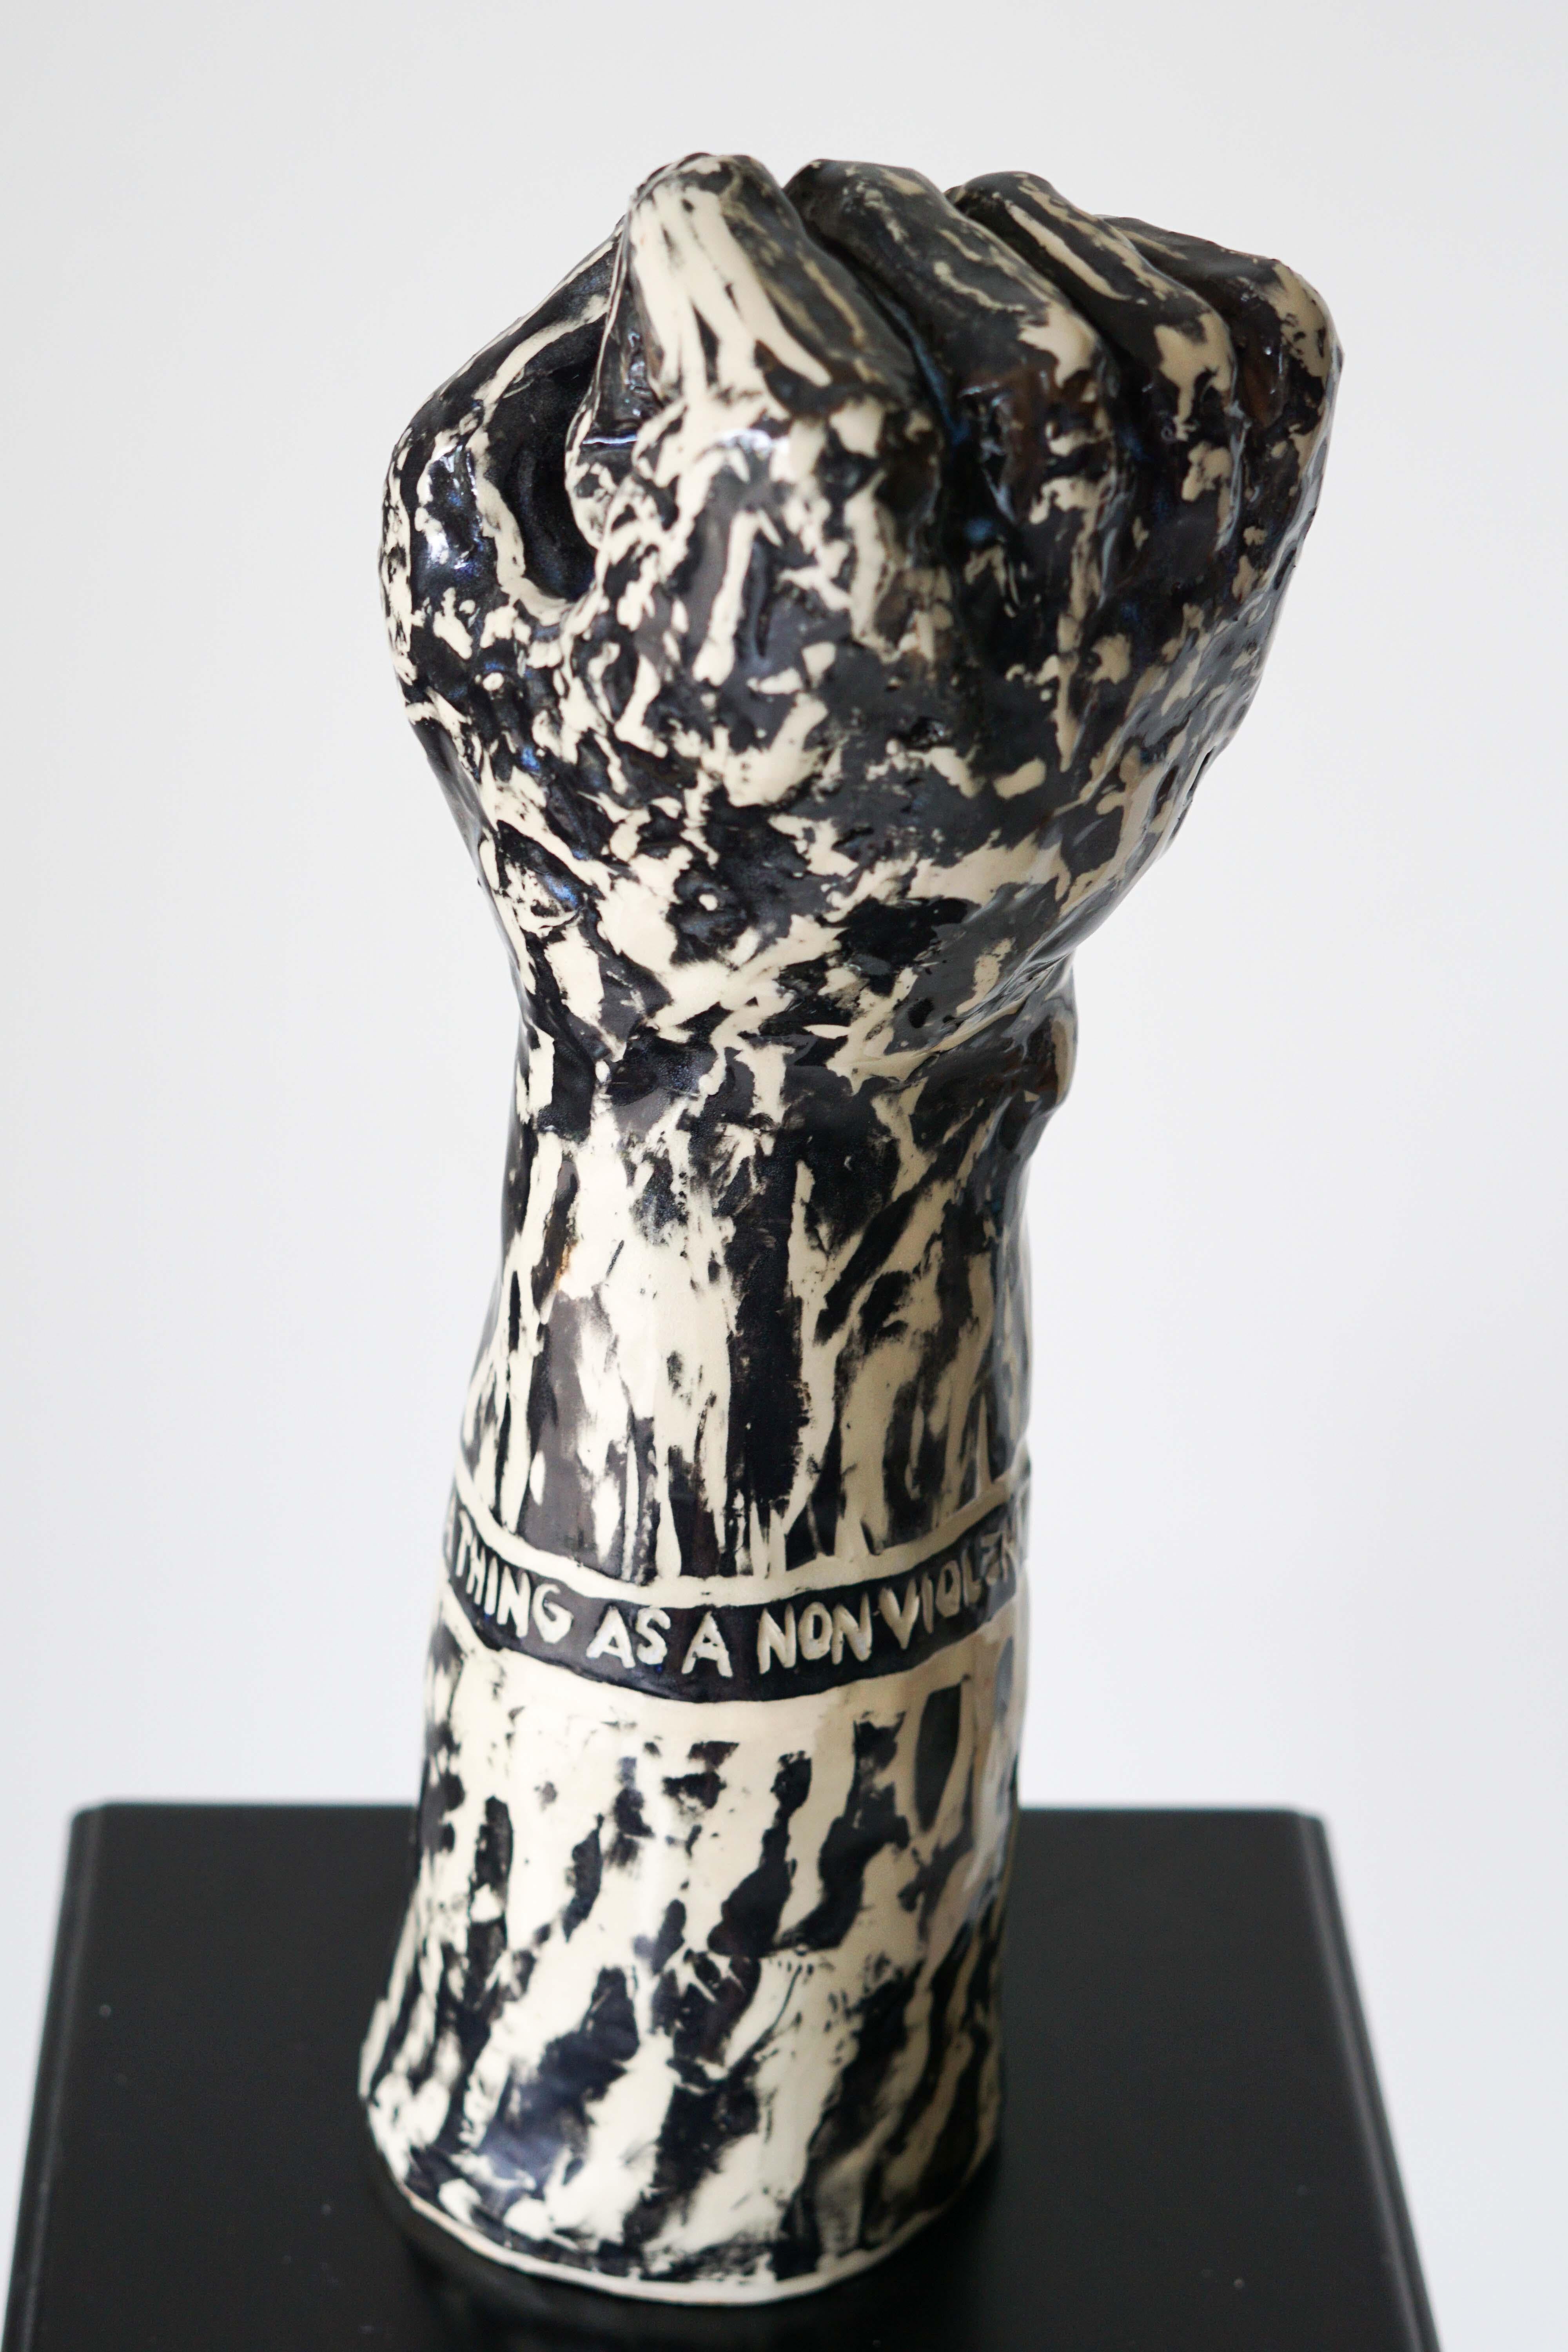 Fist is Not a Fight Ceramic Sculpture with under Glaze Sgraffito 2